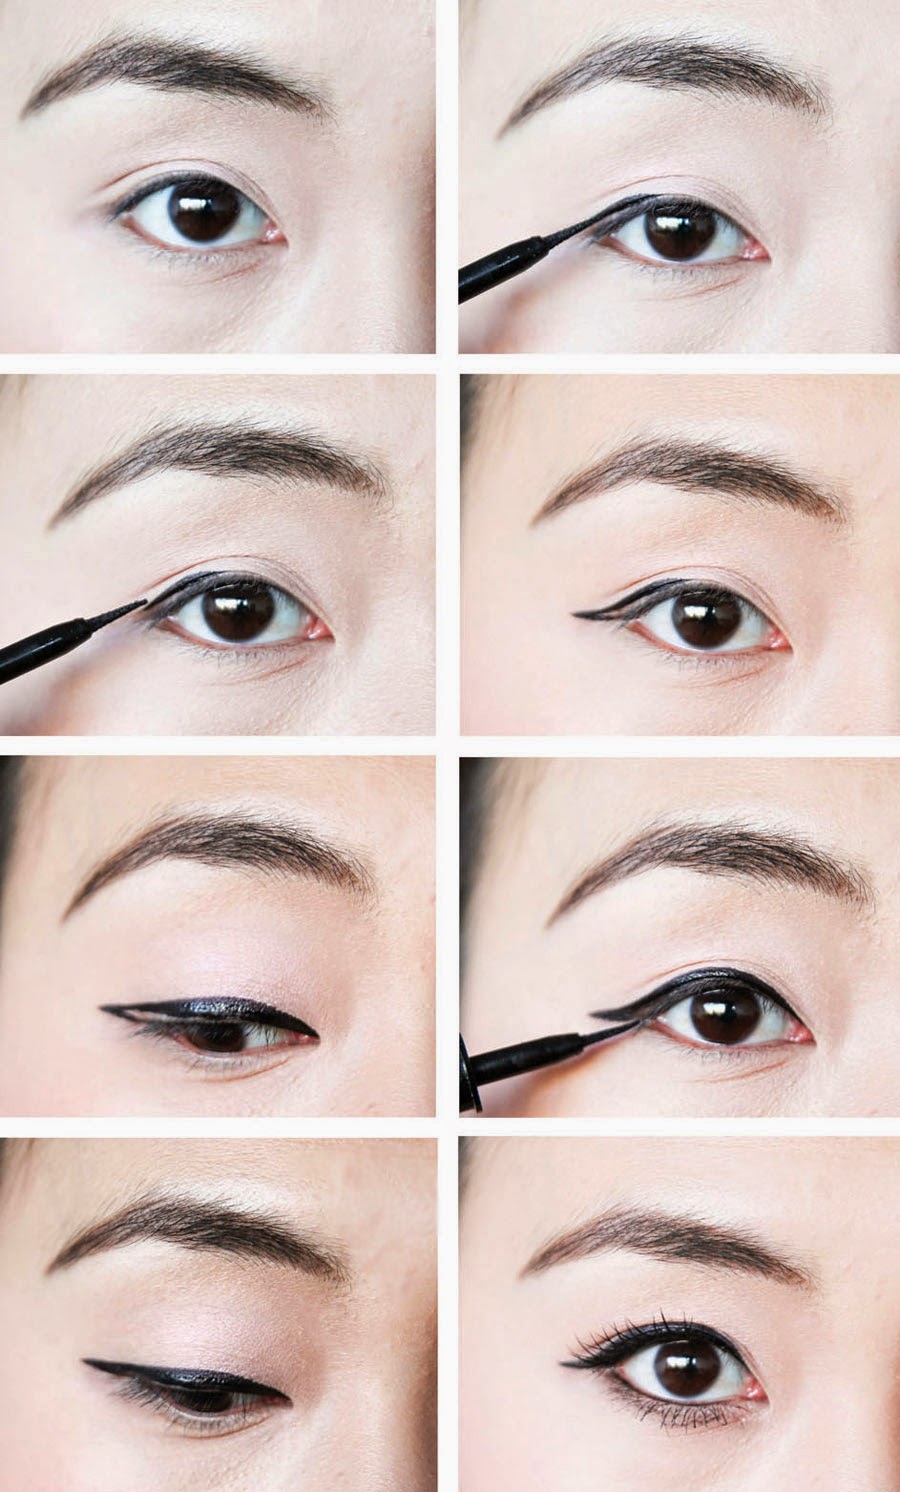 How to Do Asian Eye Makeup: 11 Tips and Tricks